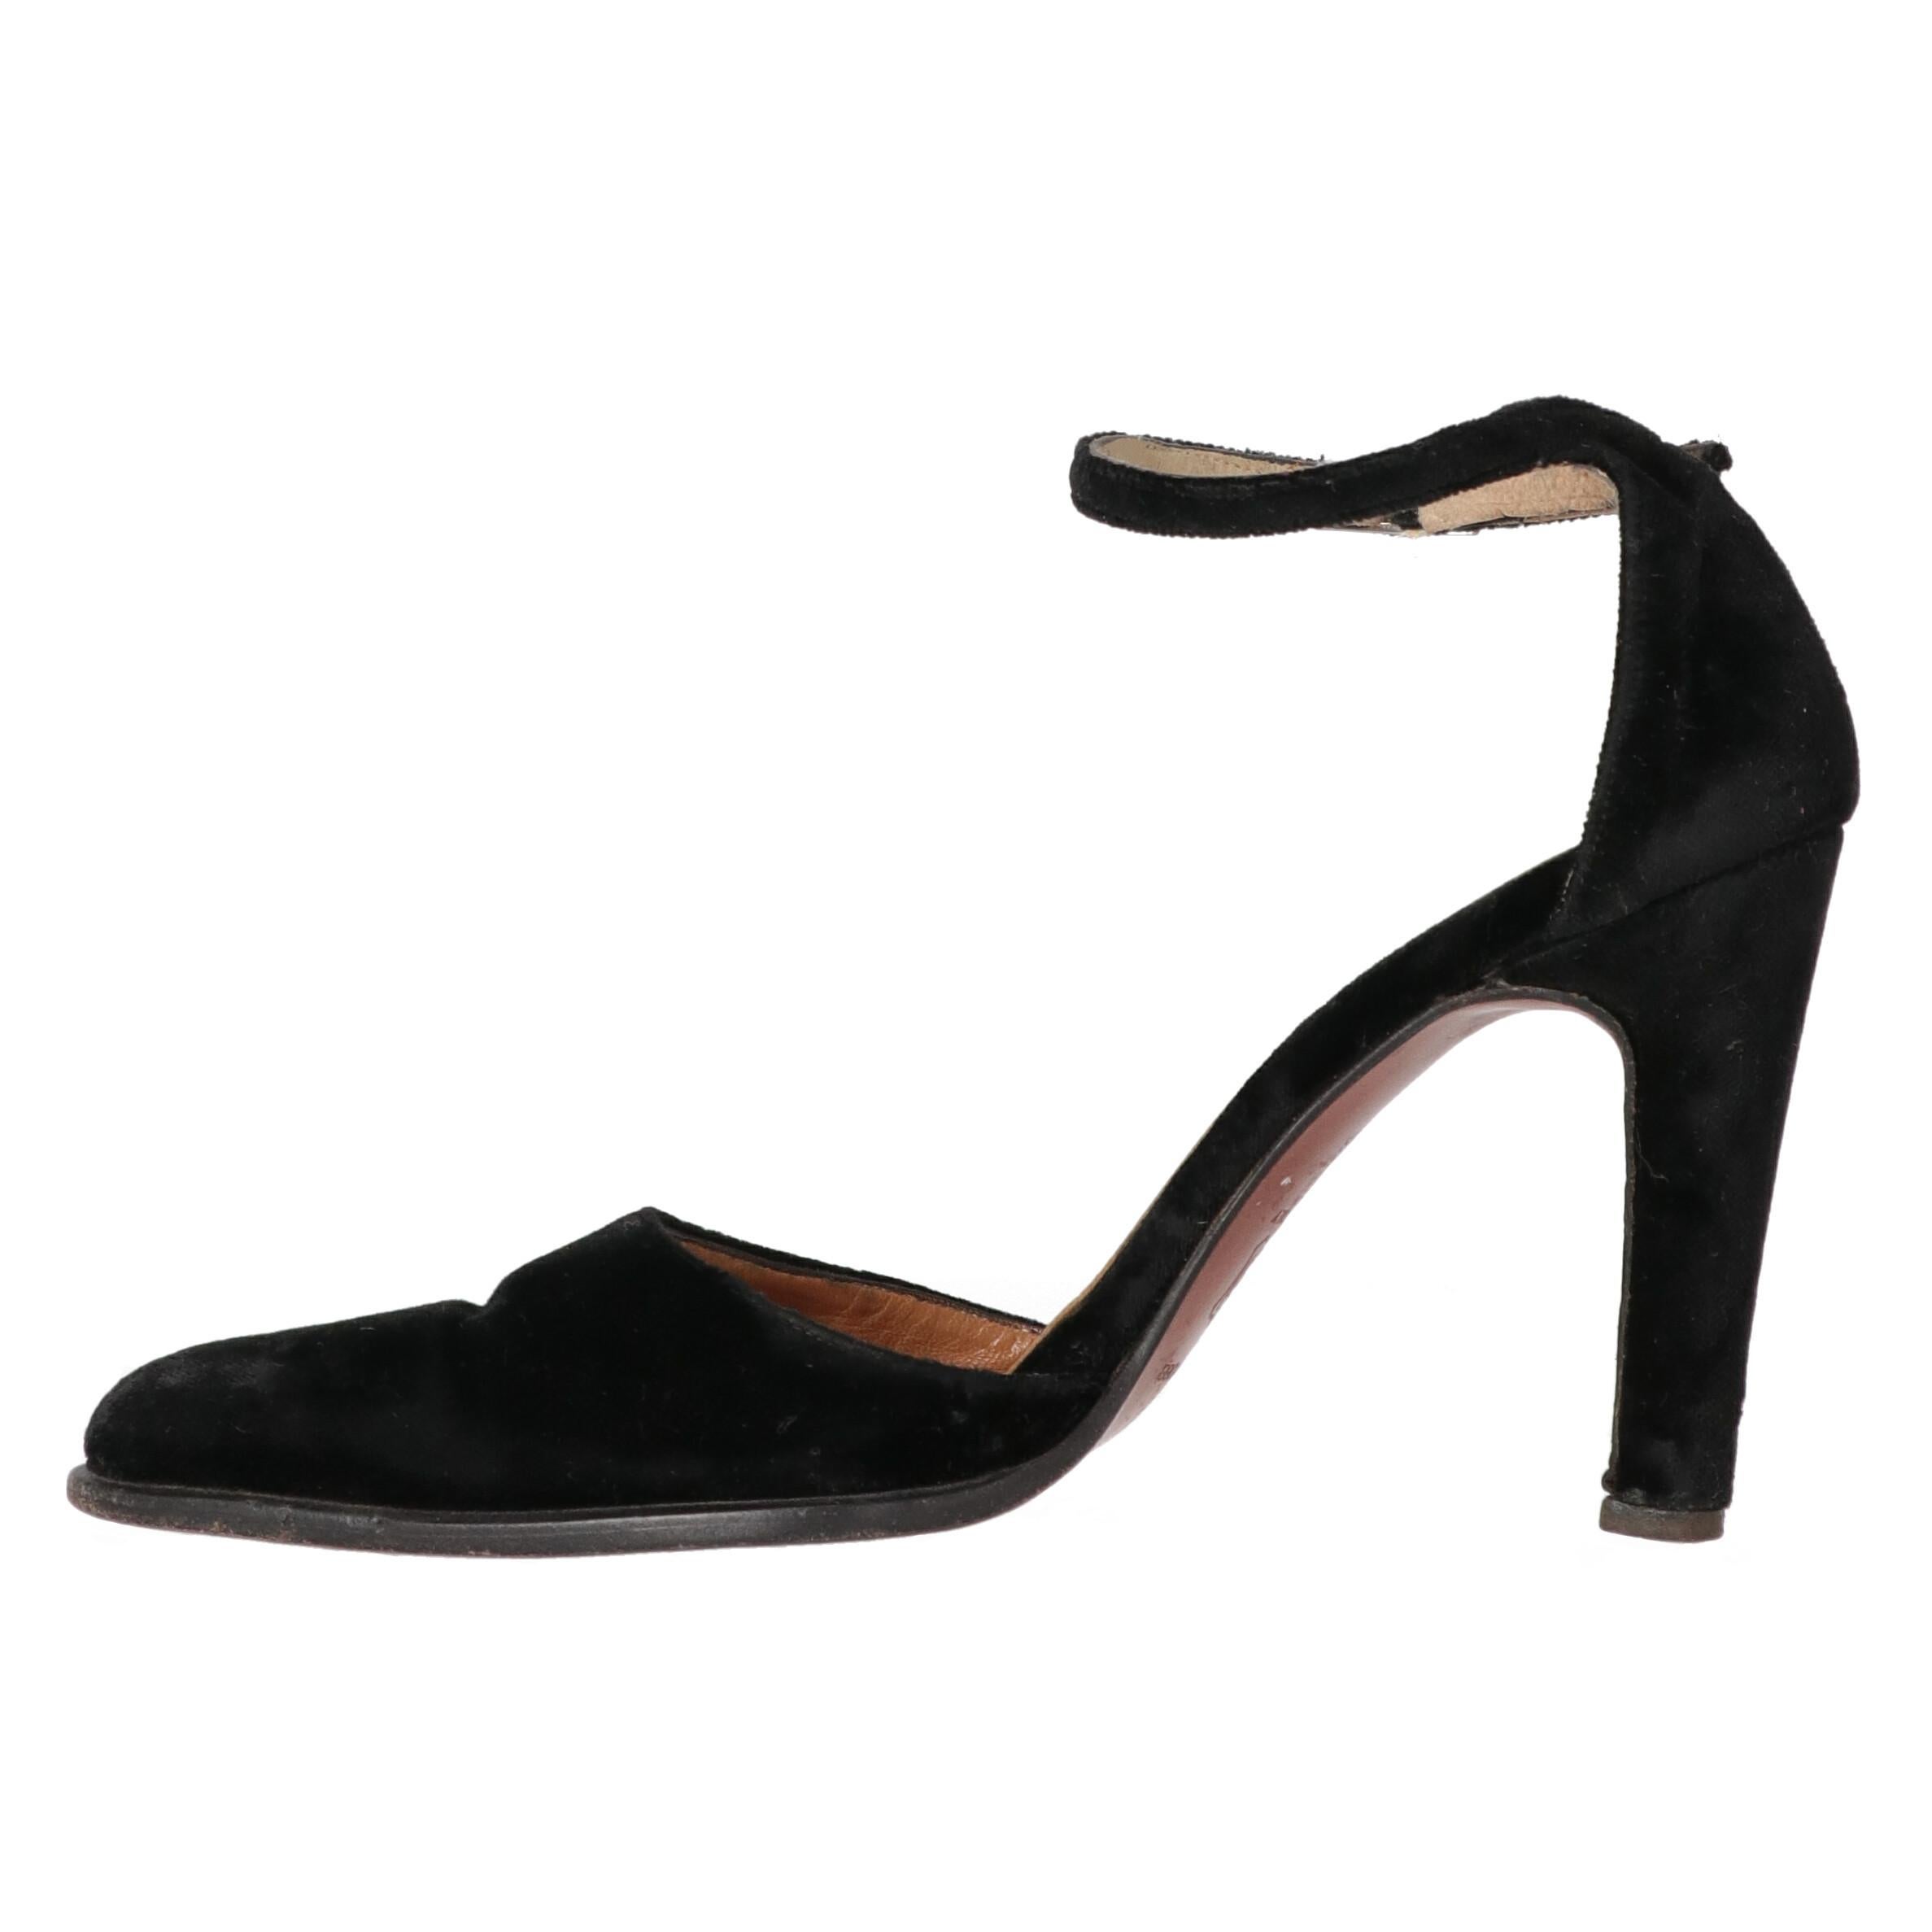 Sergio Rossi black velvet pumps with ankle strap. Open design, pointed toe and stiletto heel.

The item shows some signs of wear on the velvet and the sole, as shown in the pictures. 

Years: 90s

Made in Italy

Size: 38.5 EU

Heel: 10 cm
Insole